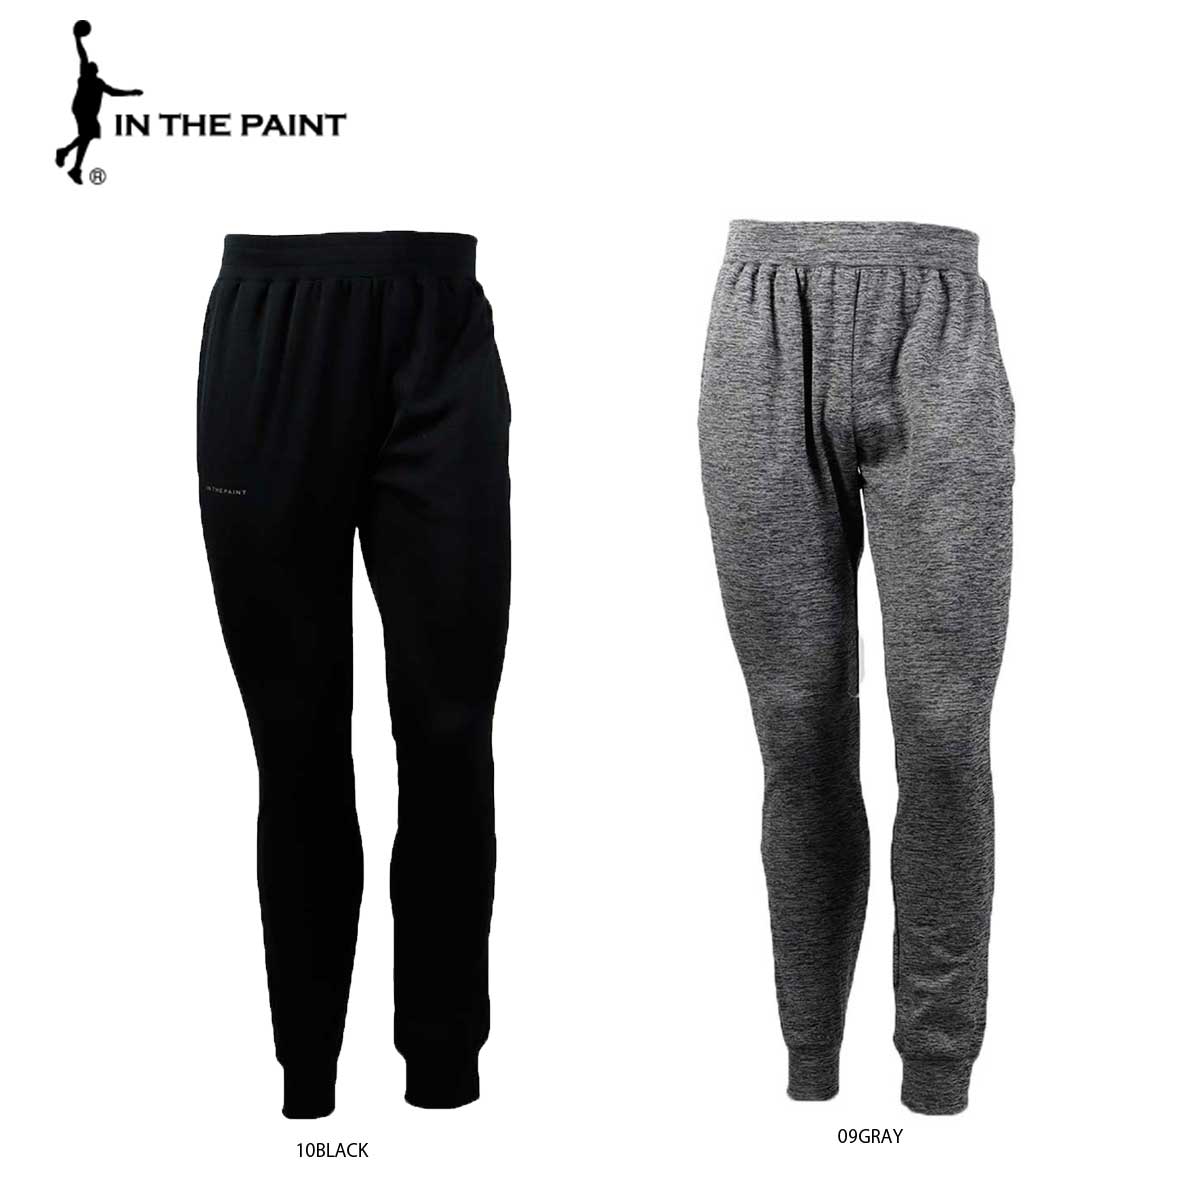 IN THE PAINT(インザペント) ITP21453 TWO PLY CARDBOARD SWEAT PANTS スウェットパンツ バスケット